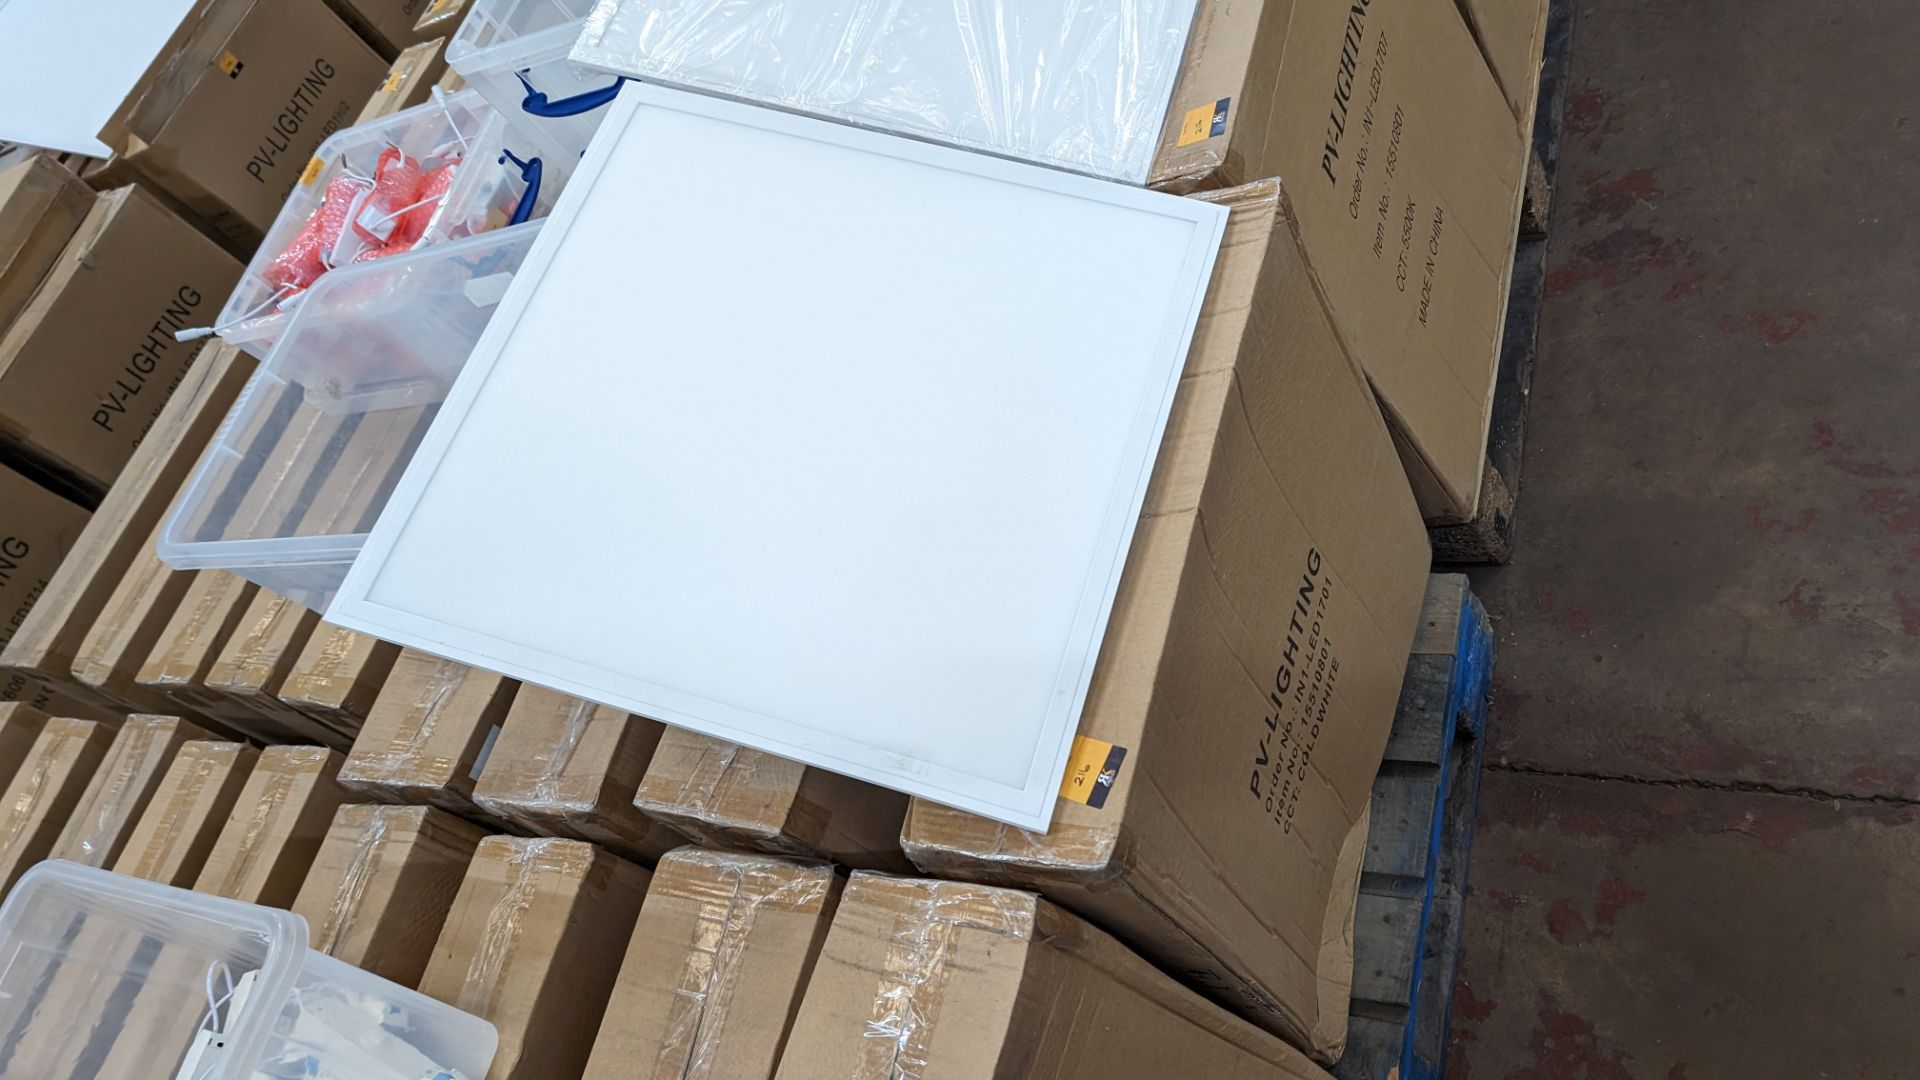 16 off 600mm x 600mm 36w 6000k 4320 lumens cold white LED lighting panels. 36w drivers. This lot c - Image 3 of 12